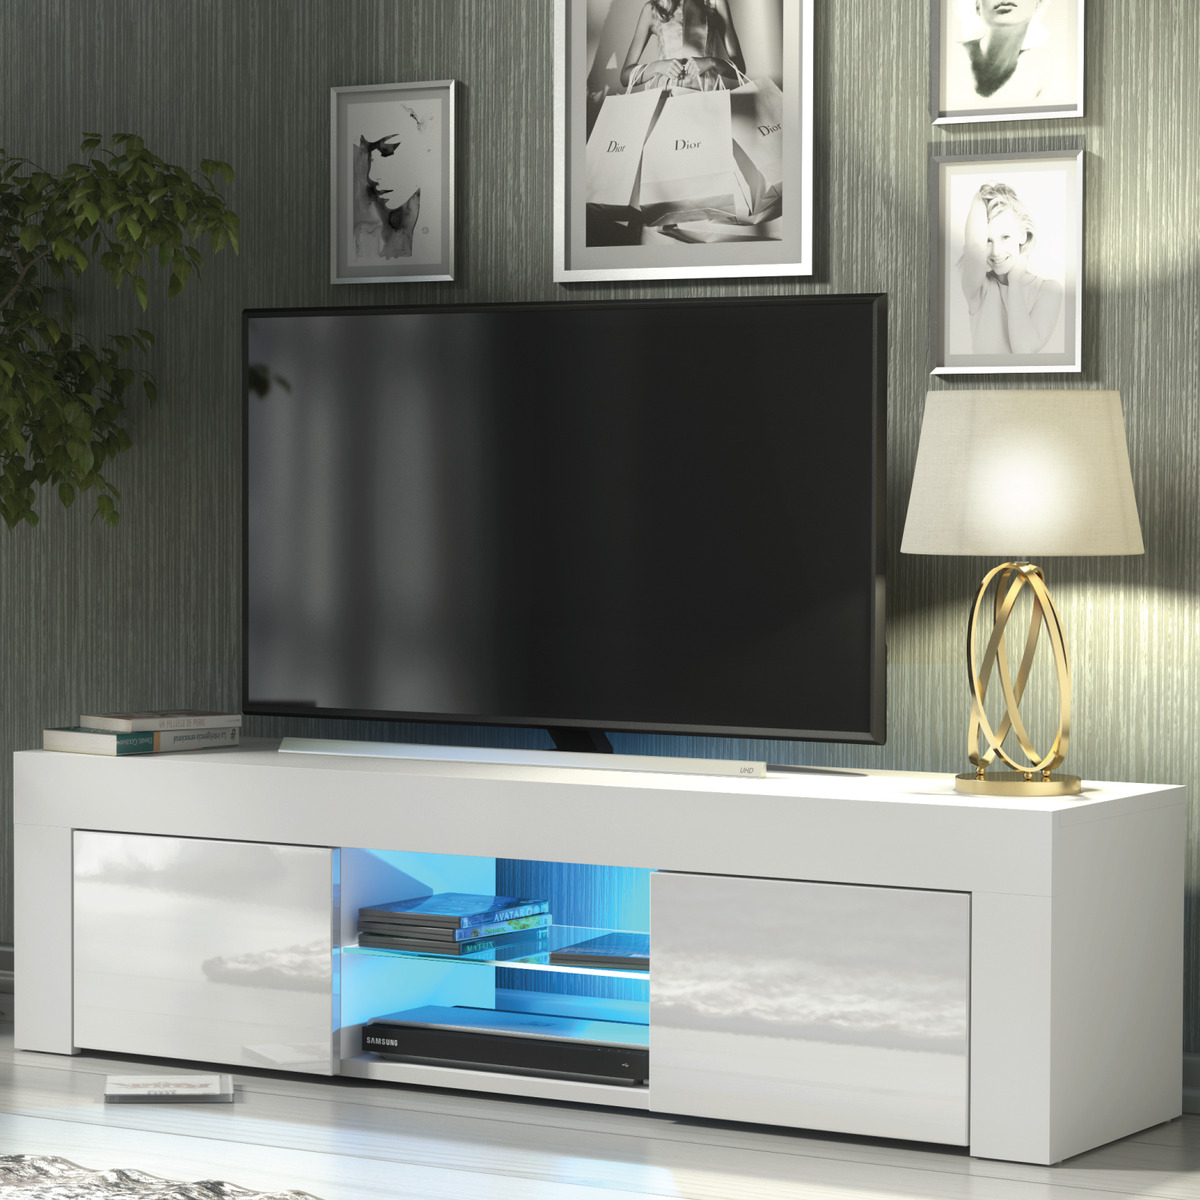 Where To Get A TV Stand